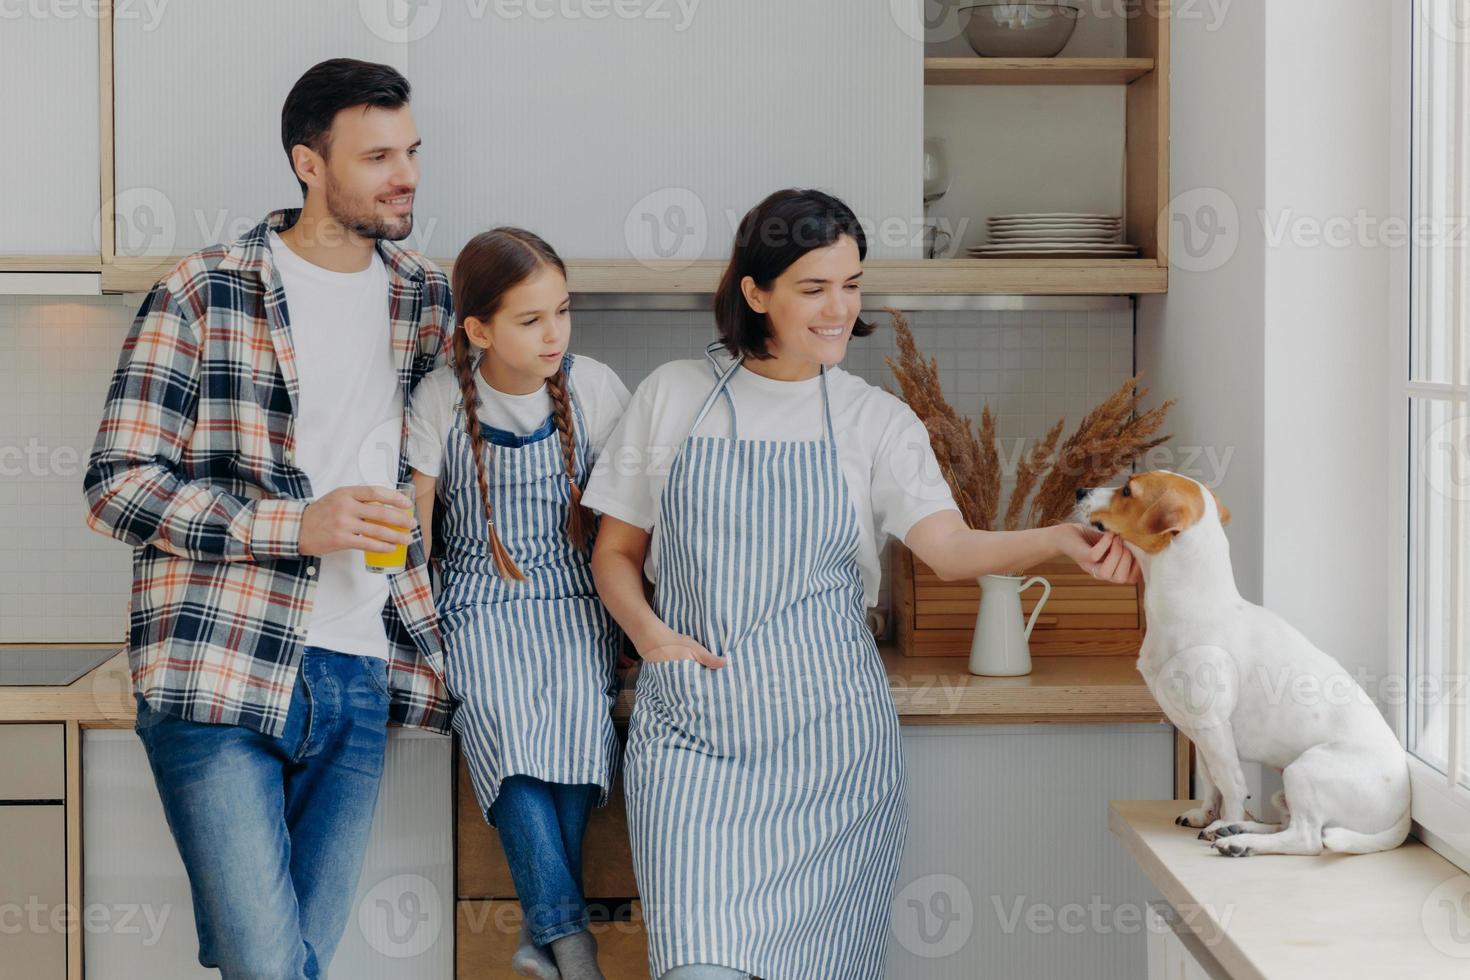 Friendly positive family members stand together at kitchen, play with dog, mother and daughter wear aprons, father drinks fresh juice, enjoy domestic atmosphere. People, relationship, home concept photo